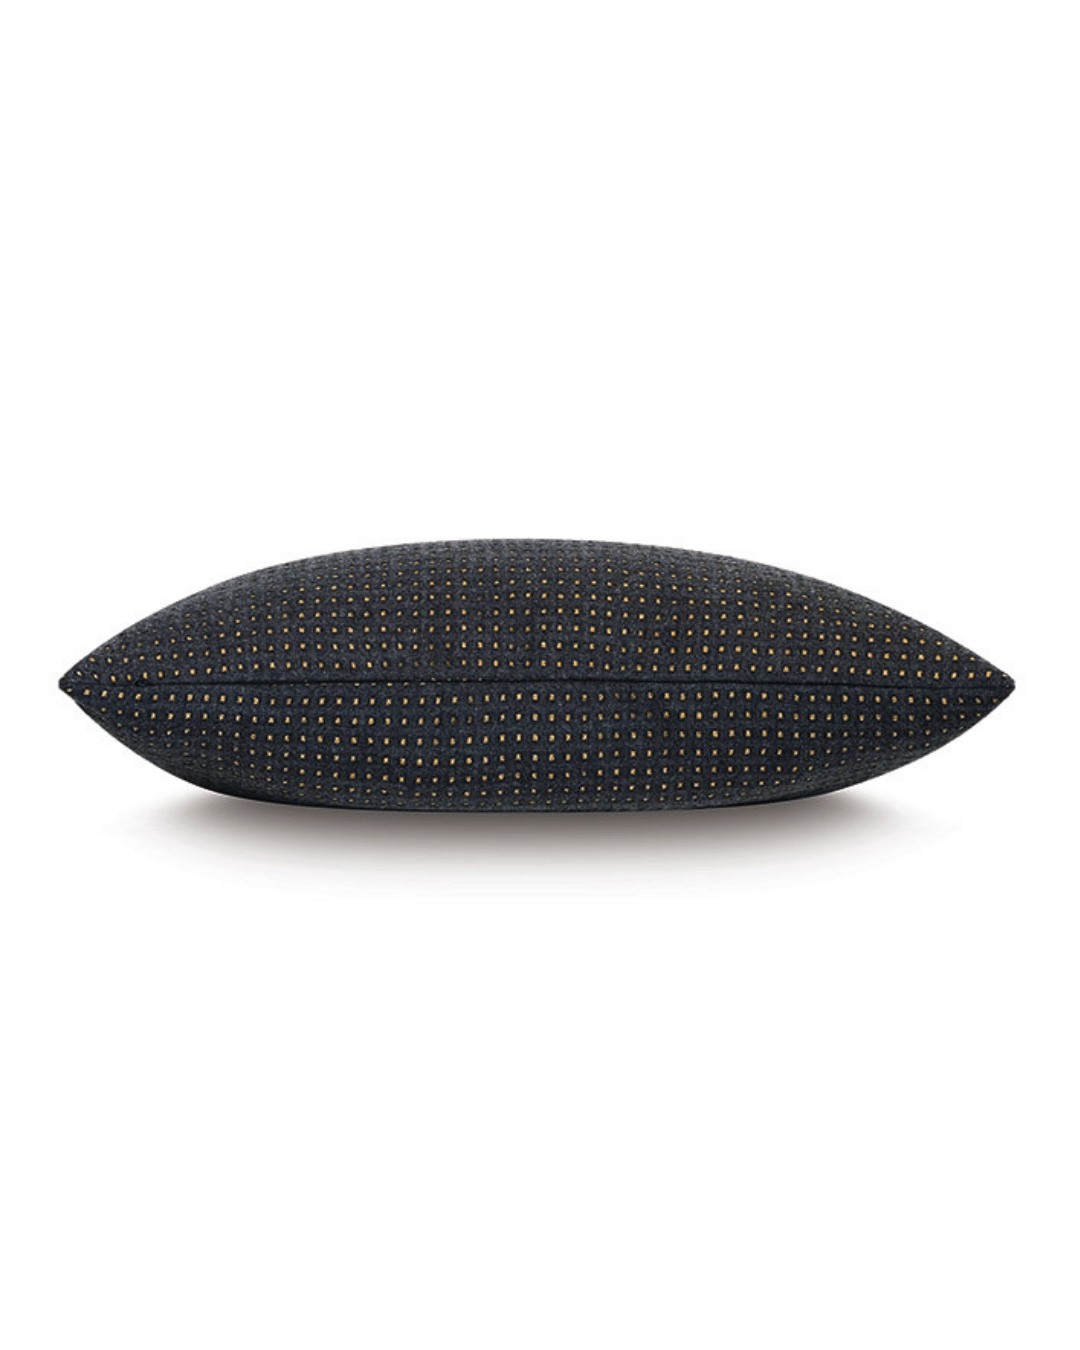 A black Eastern Accents Octa Wool Pillow with a dotted pattern, photographed against a white background in a Scottsdale Arizona bungalow.